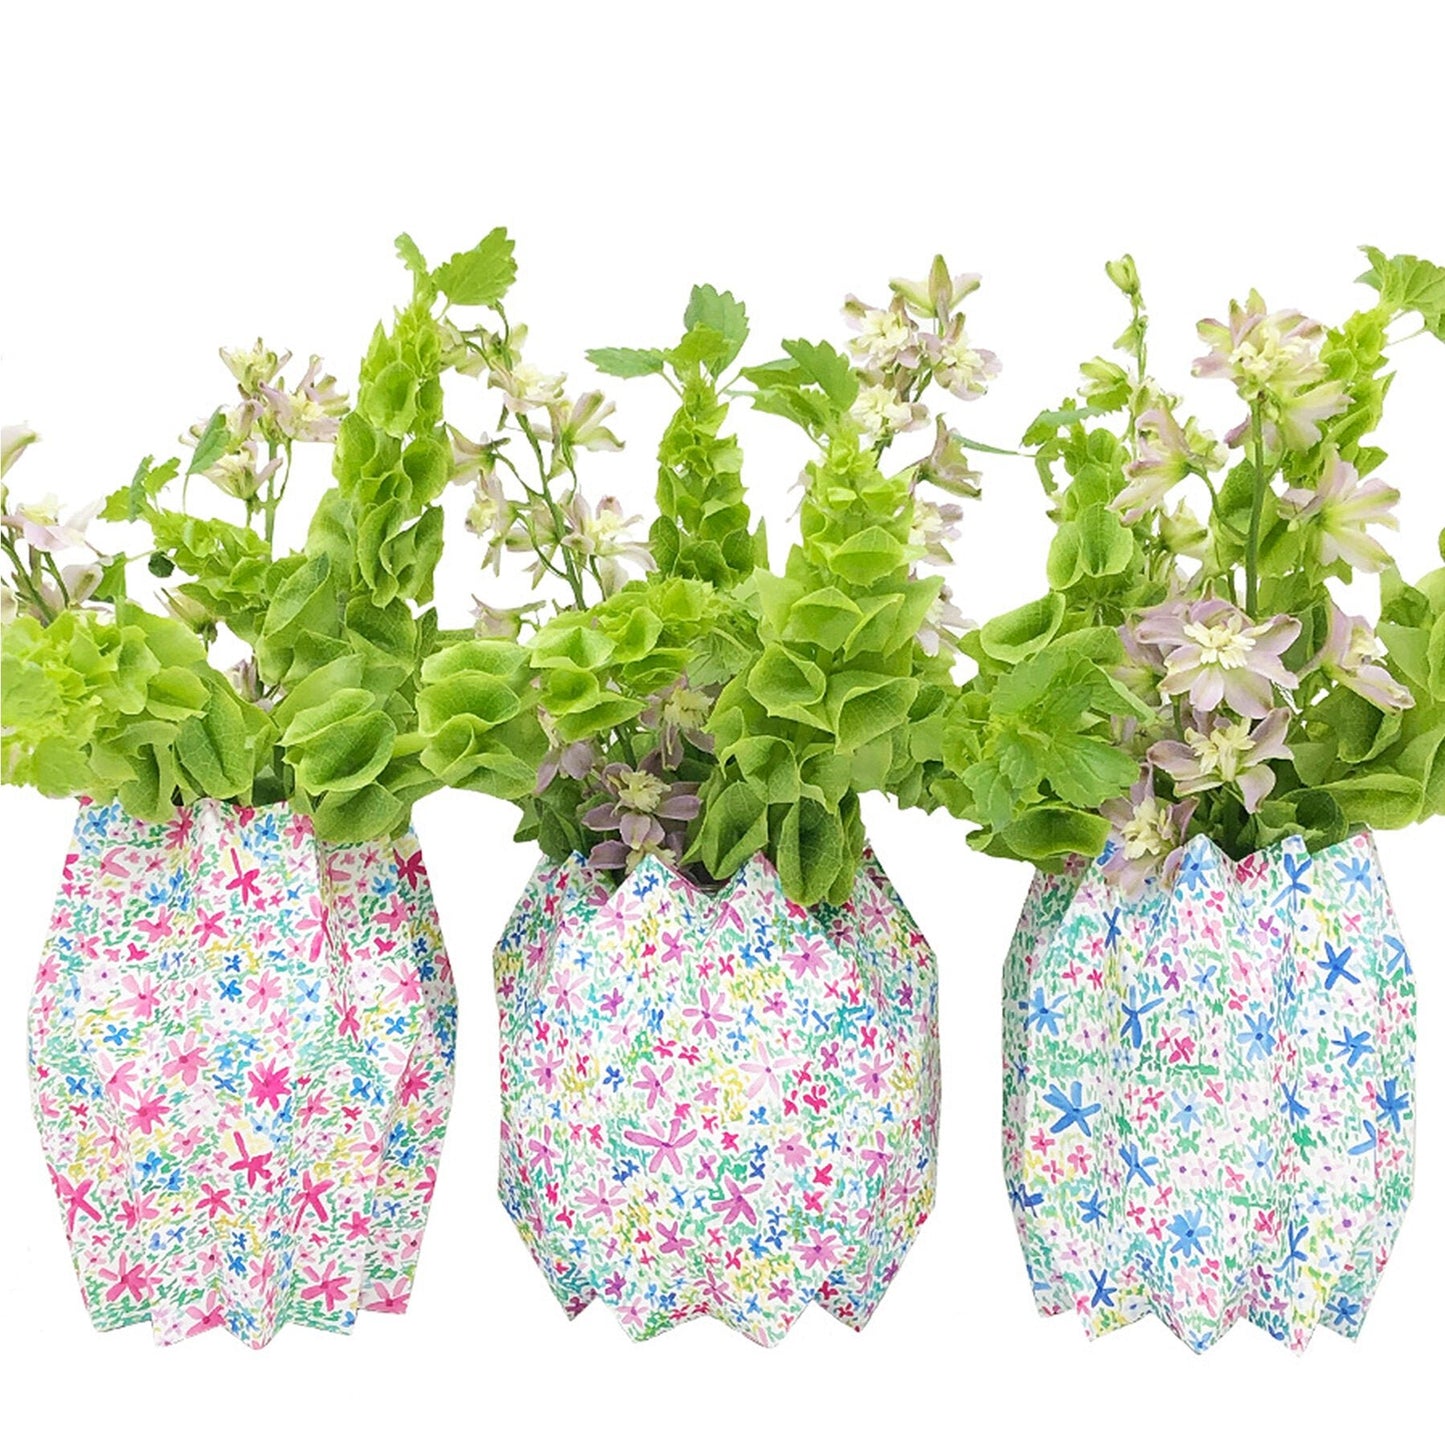 Multicolored floral patterned paper vases with green flowers